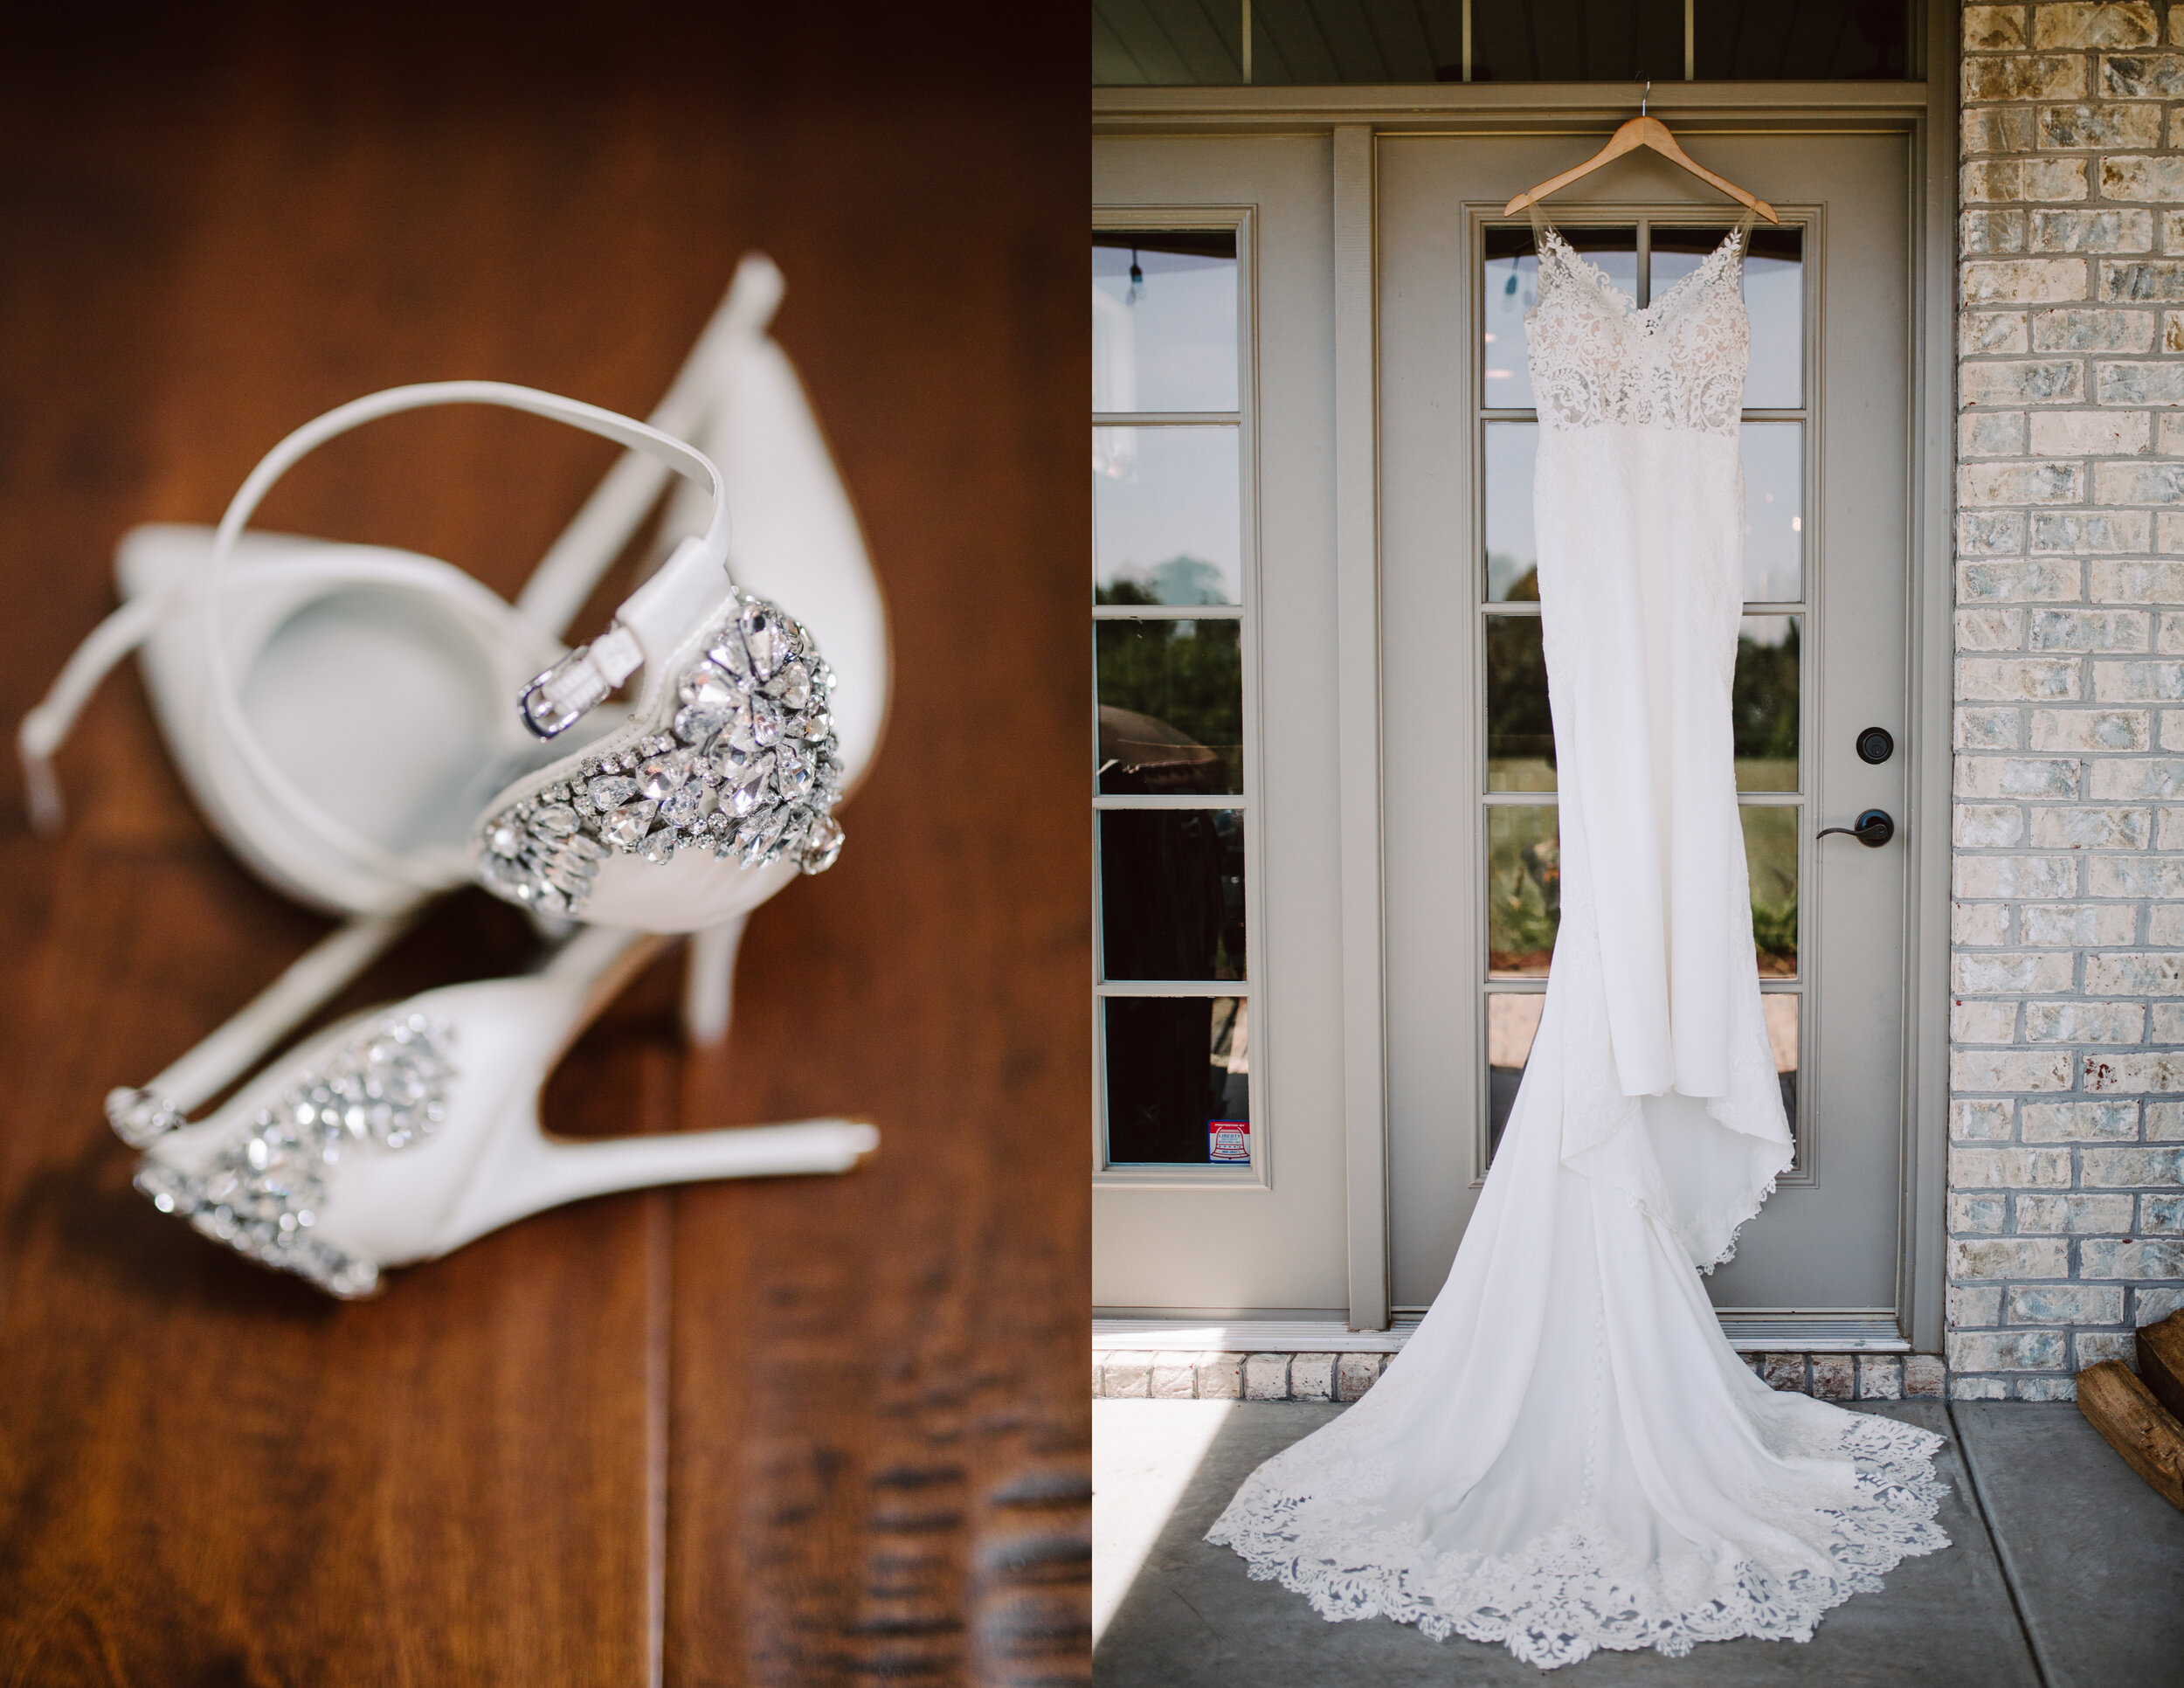 wedding details and dress at an elegant indoor summer wedding in Tennessee